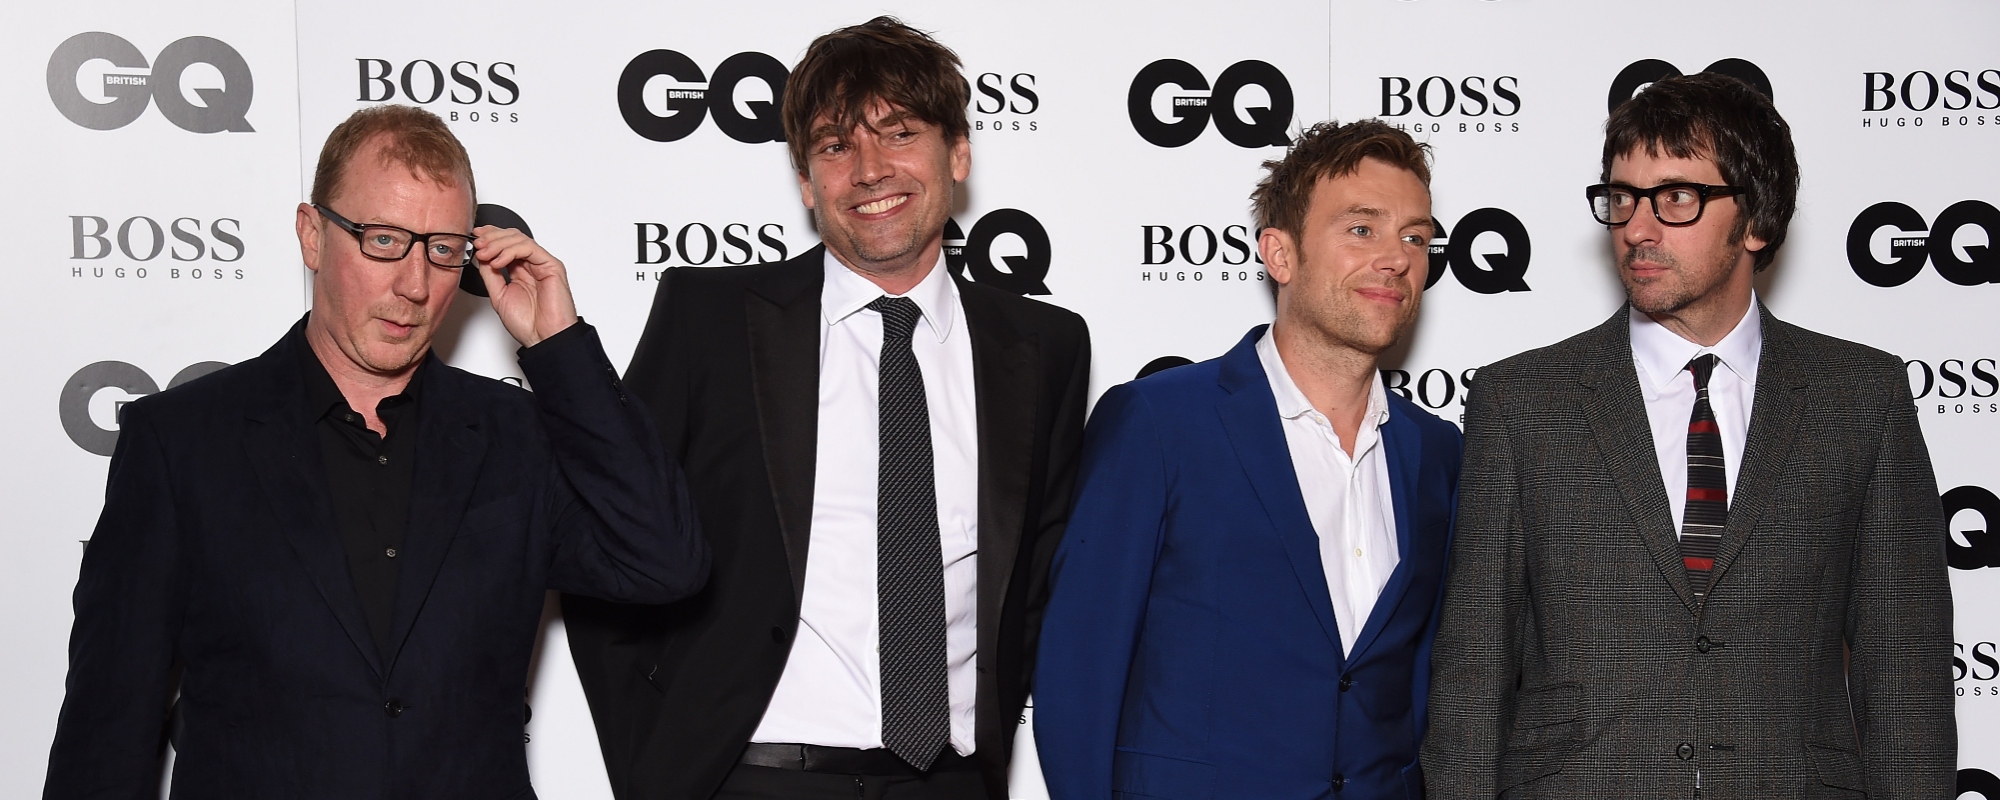 Blur Is Going on Another Hiatus According to Frontman Damon Albarn: “It’s Too Much for Me”